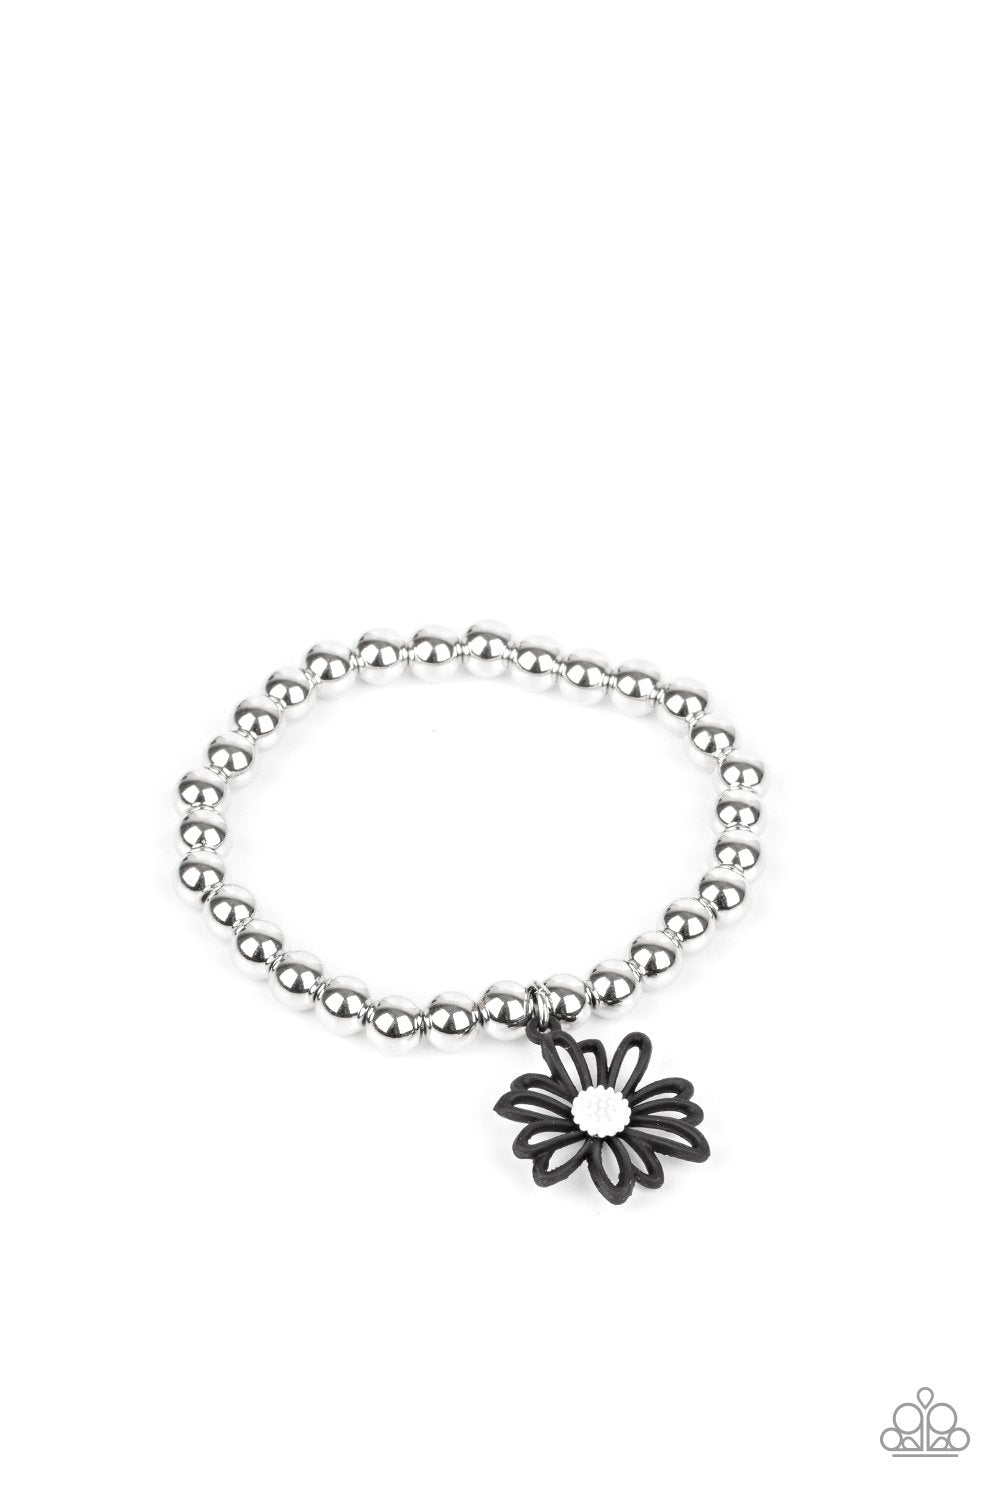 Starlet Shimmer Children&#39;s Flower Charm Bracelets - Paparazzi Accessories (set of 10)- lightbox - CarasShop.com - $5 Jewelry by Cara Jewels